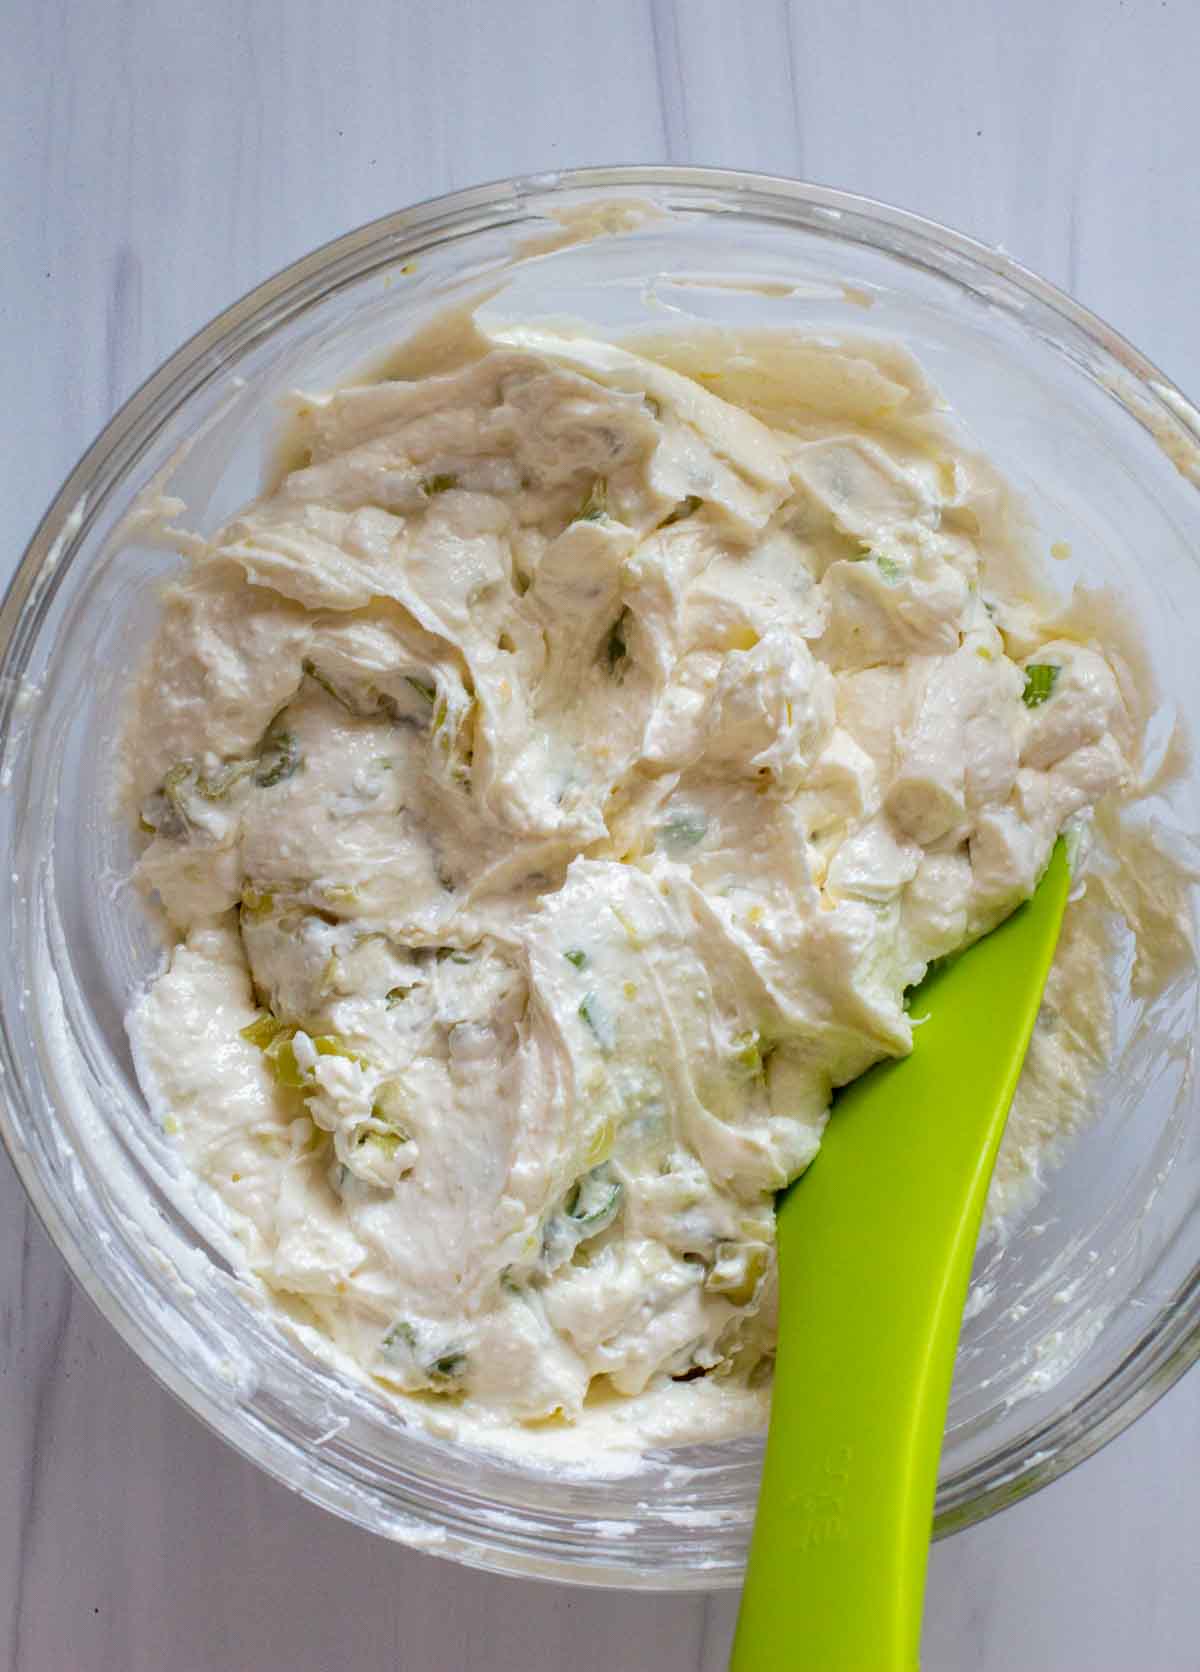 Blended vegetables and cheeses to make whipped feta dip.